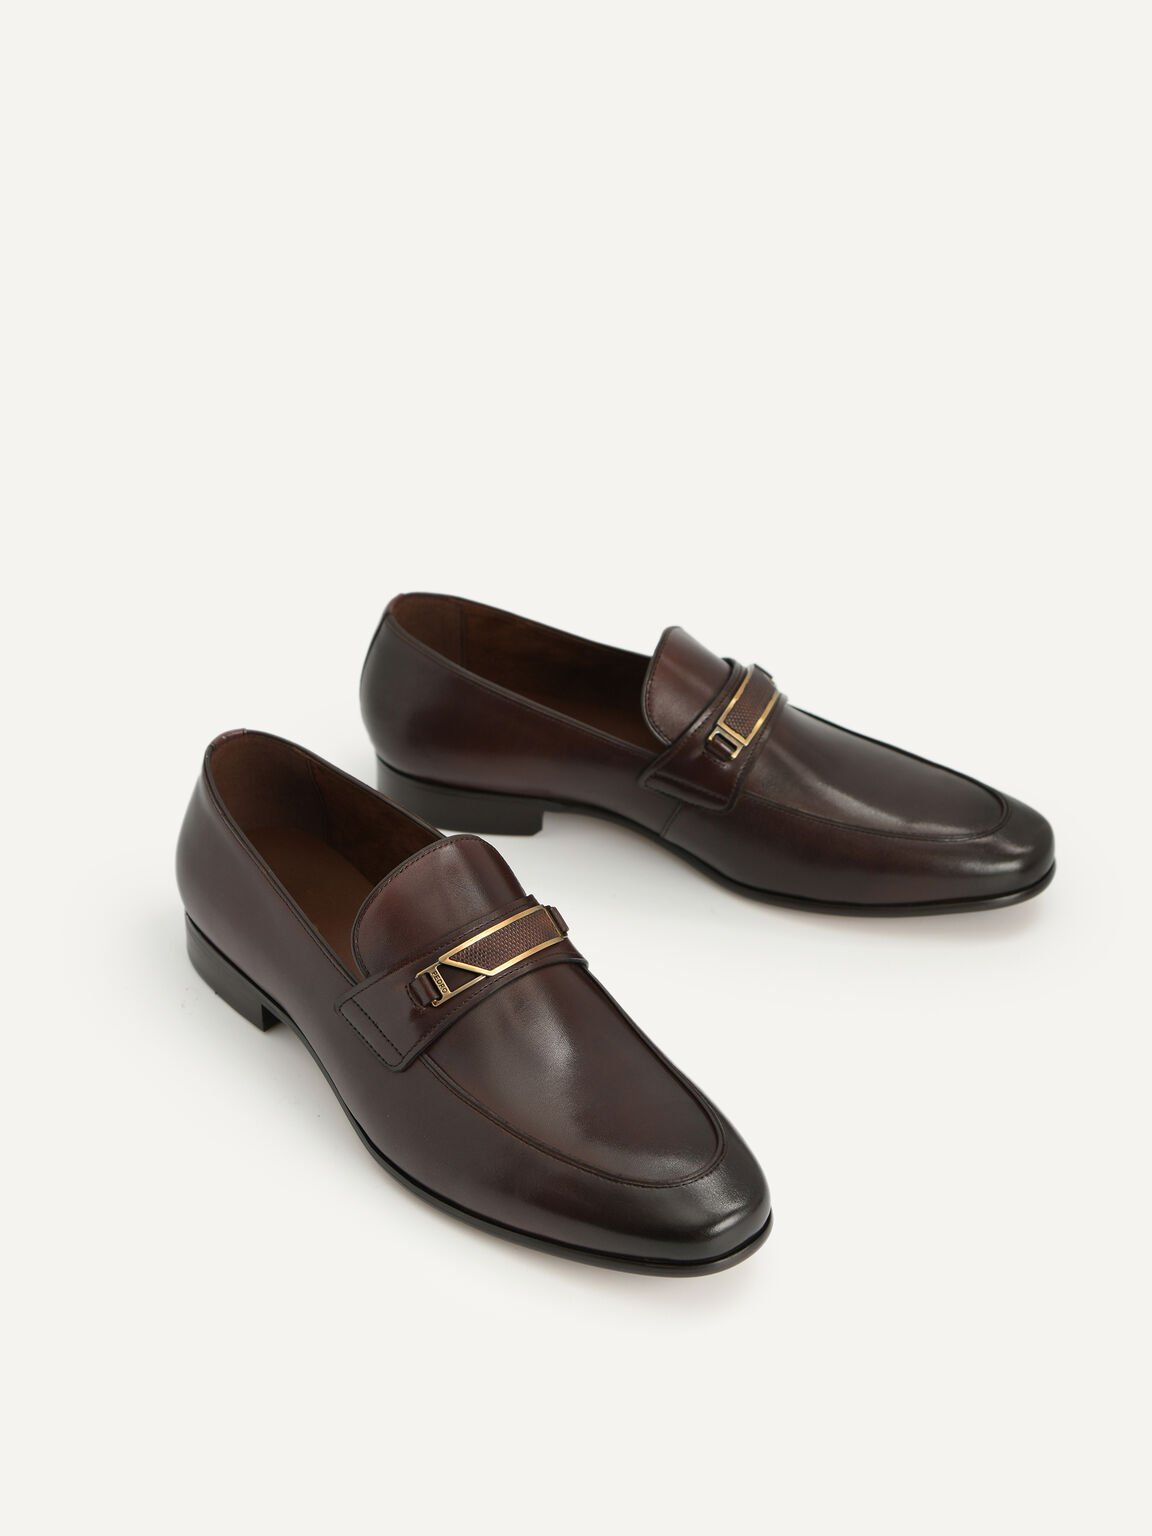 Leather Loafers with Metal Bit, Brown, hi-res